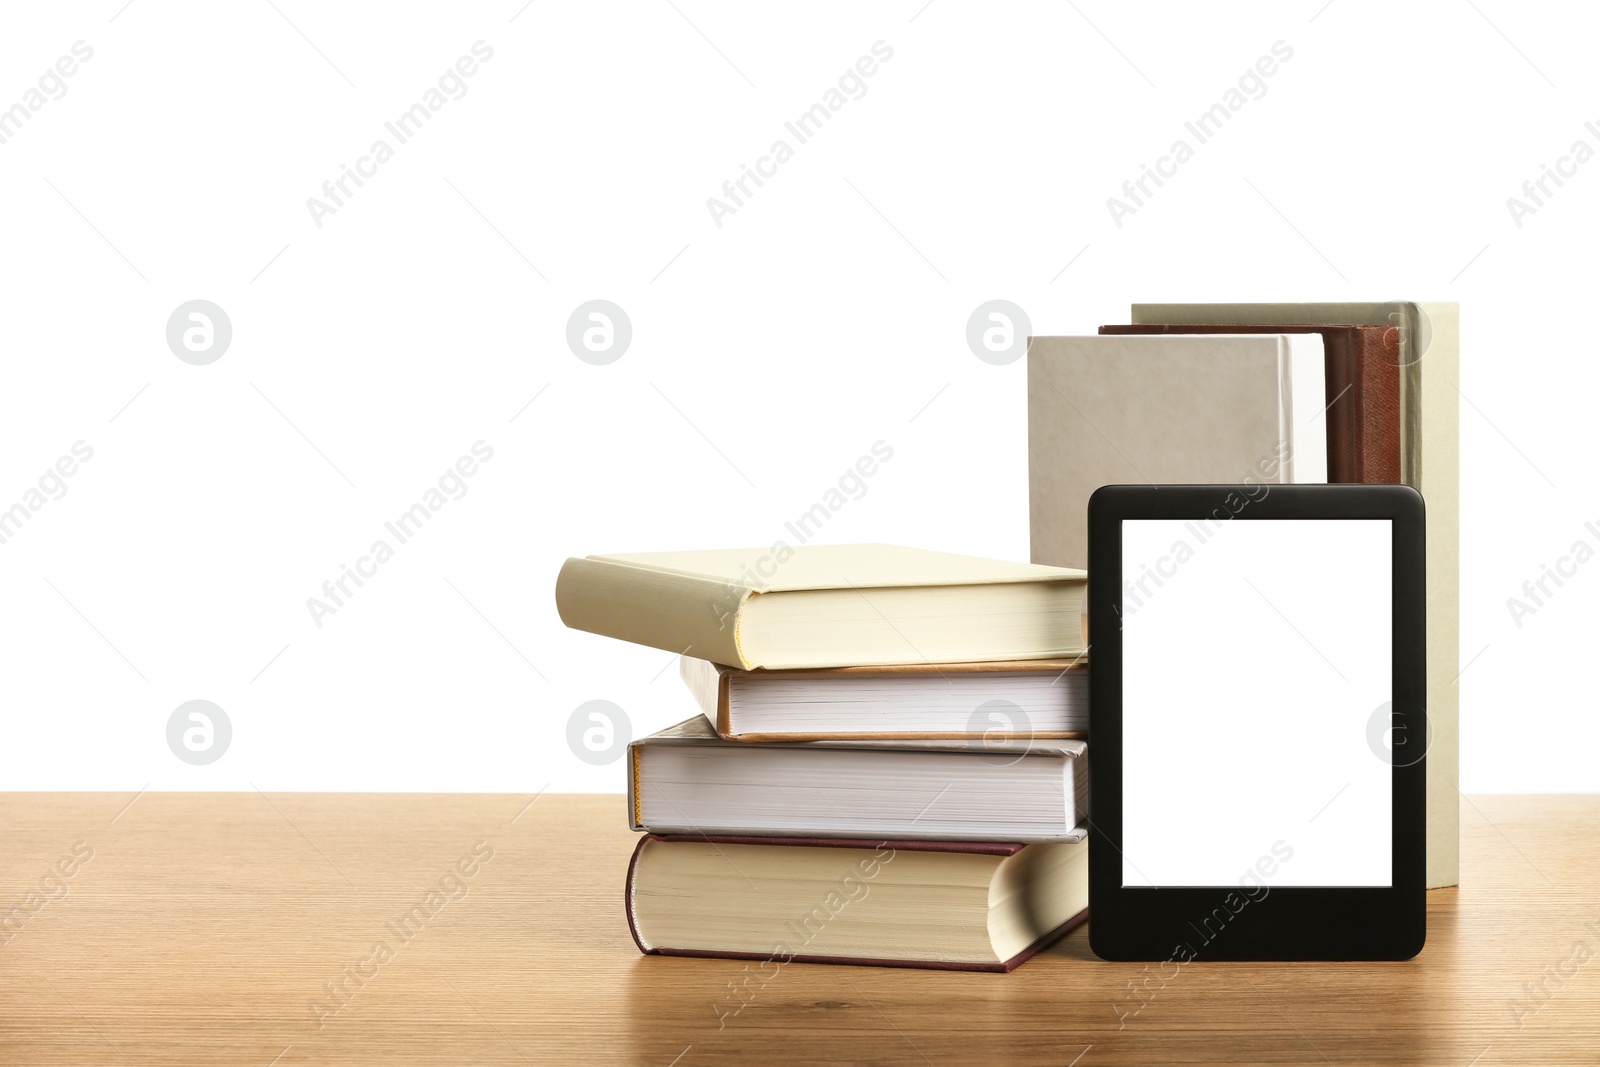 Photo of Hardcover books and modern e-book on wooden table against white background. Space for text